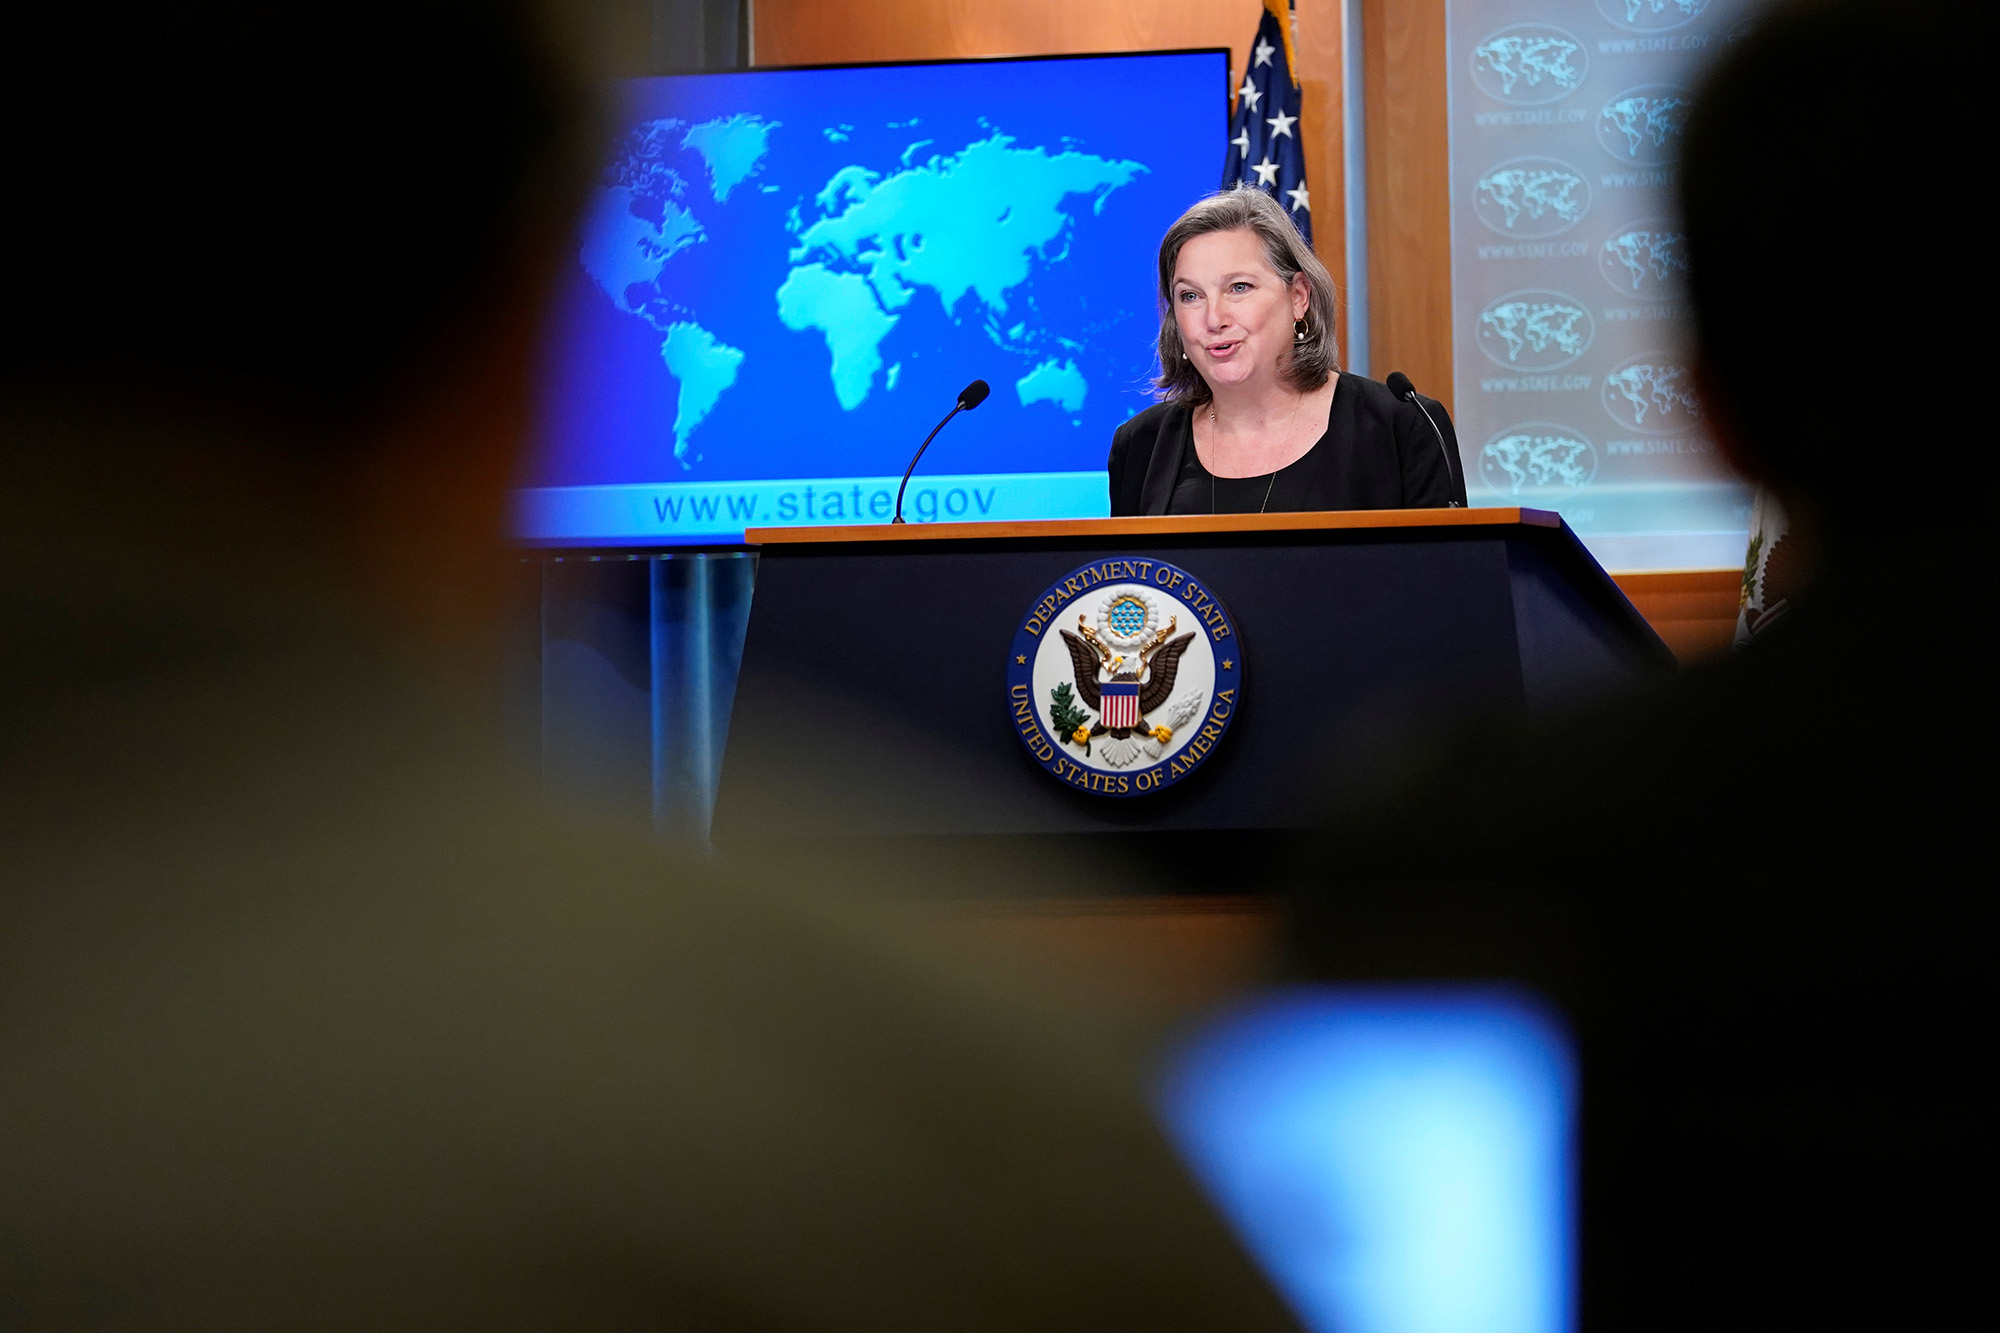 U.S. State Department Under Secretary for Public Affairs Victoria Nuland speaks during a briefing at the State Department in Washington, D.C., on January 27.